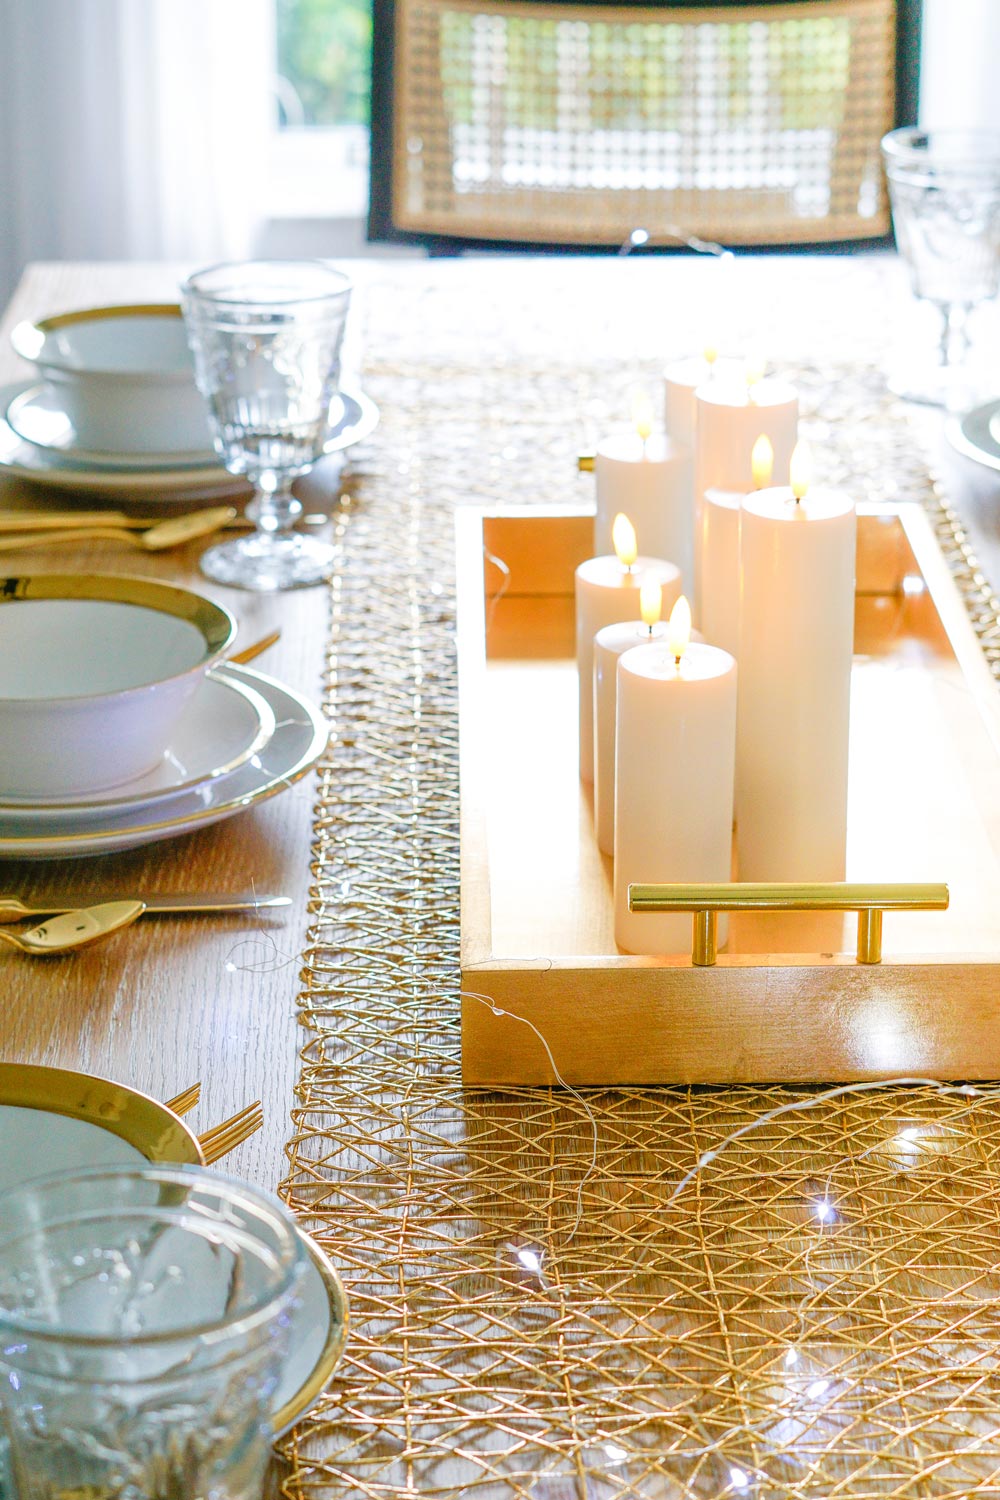 Table with a gold tray filled with candles in the center. White dinnerware with gold trim and gold flatware.